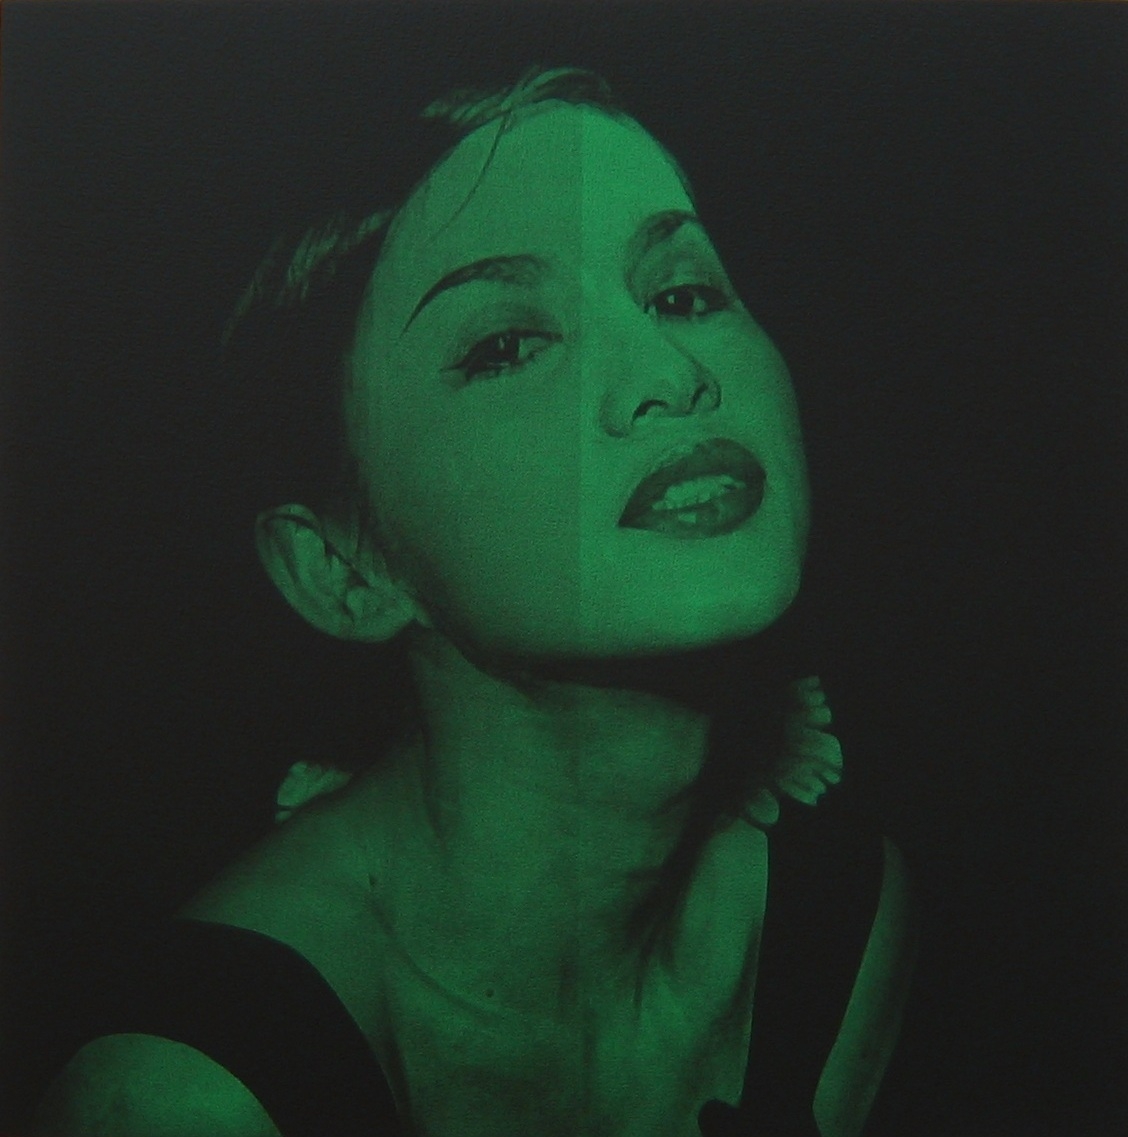   after Goldin, 1992 (C. at the Club, Bangkok)   24 x 24, acrylic on canvas, 2005 